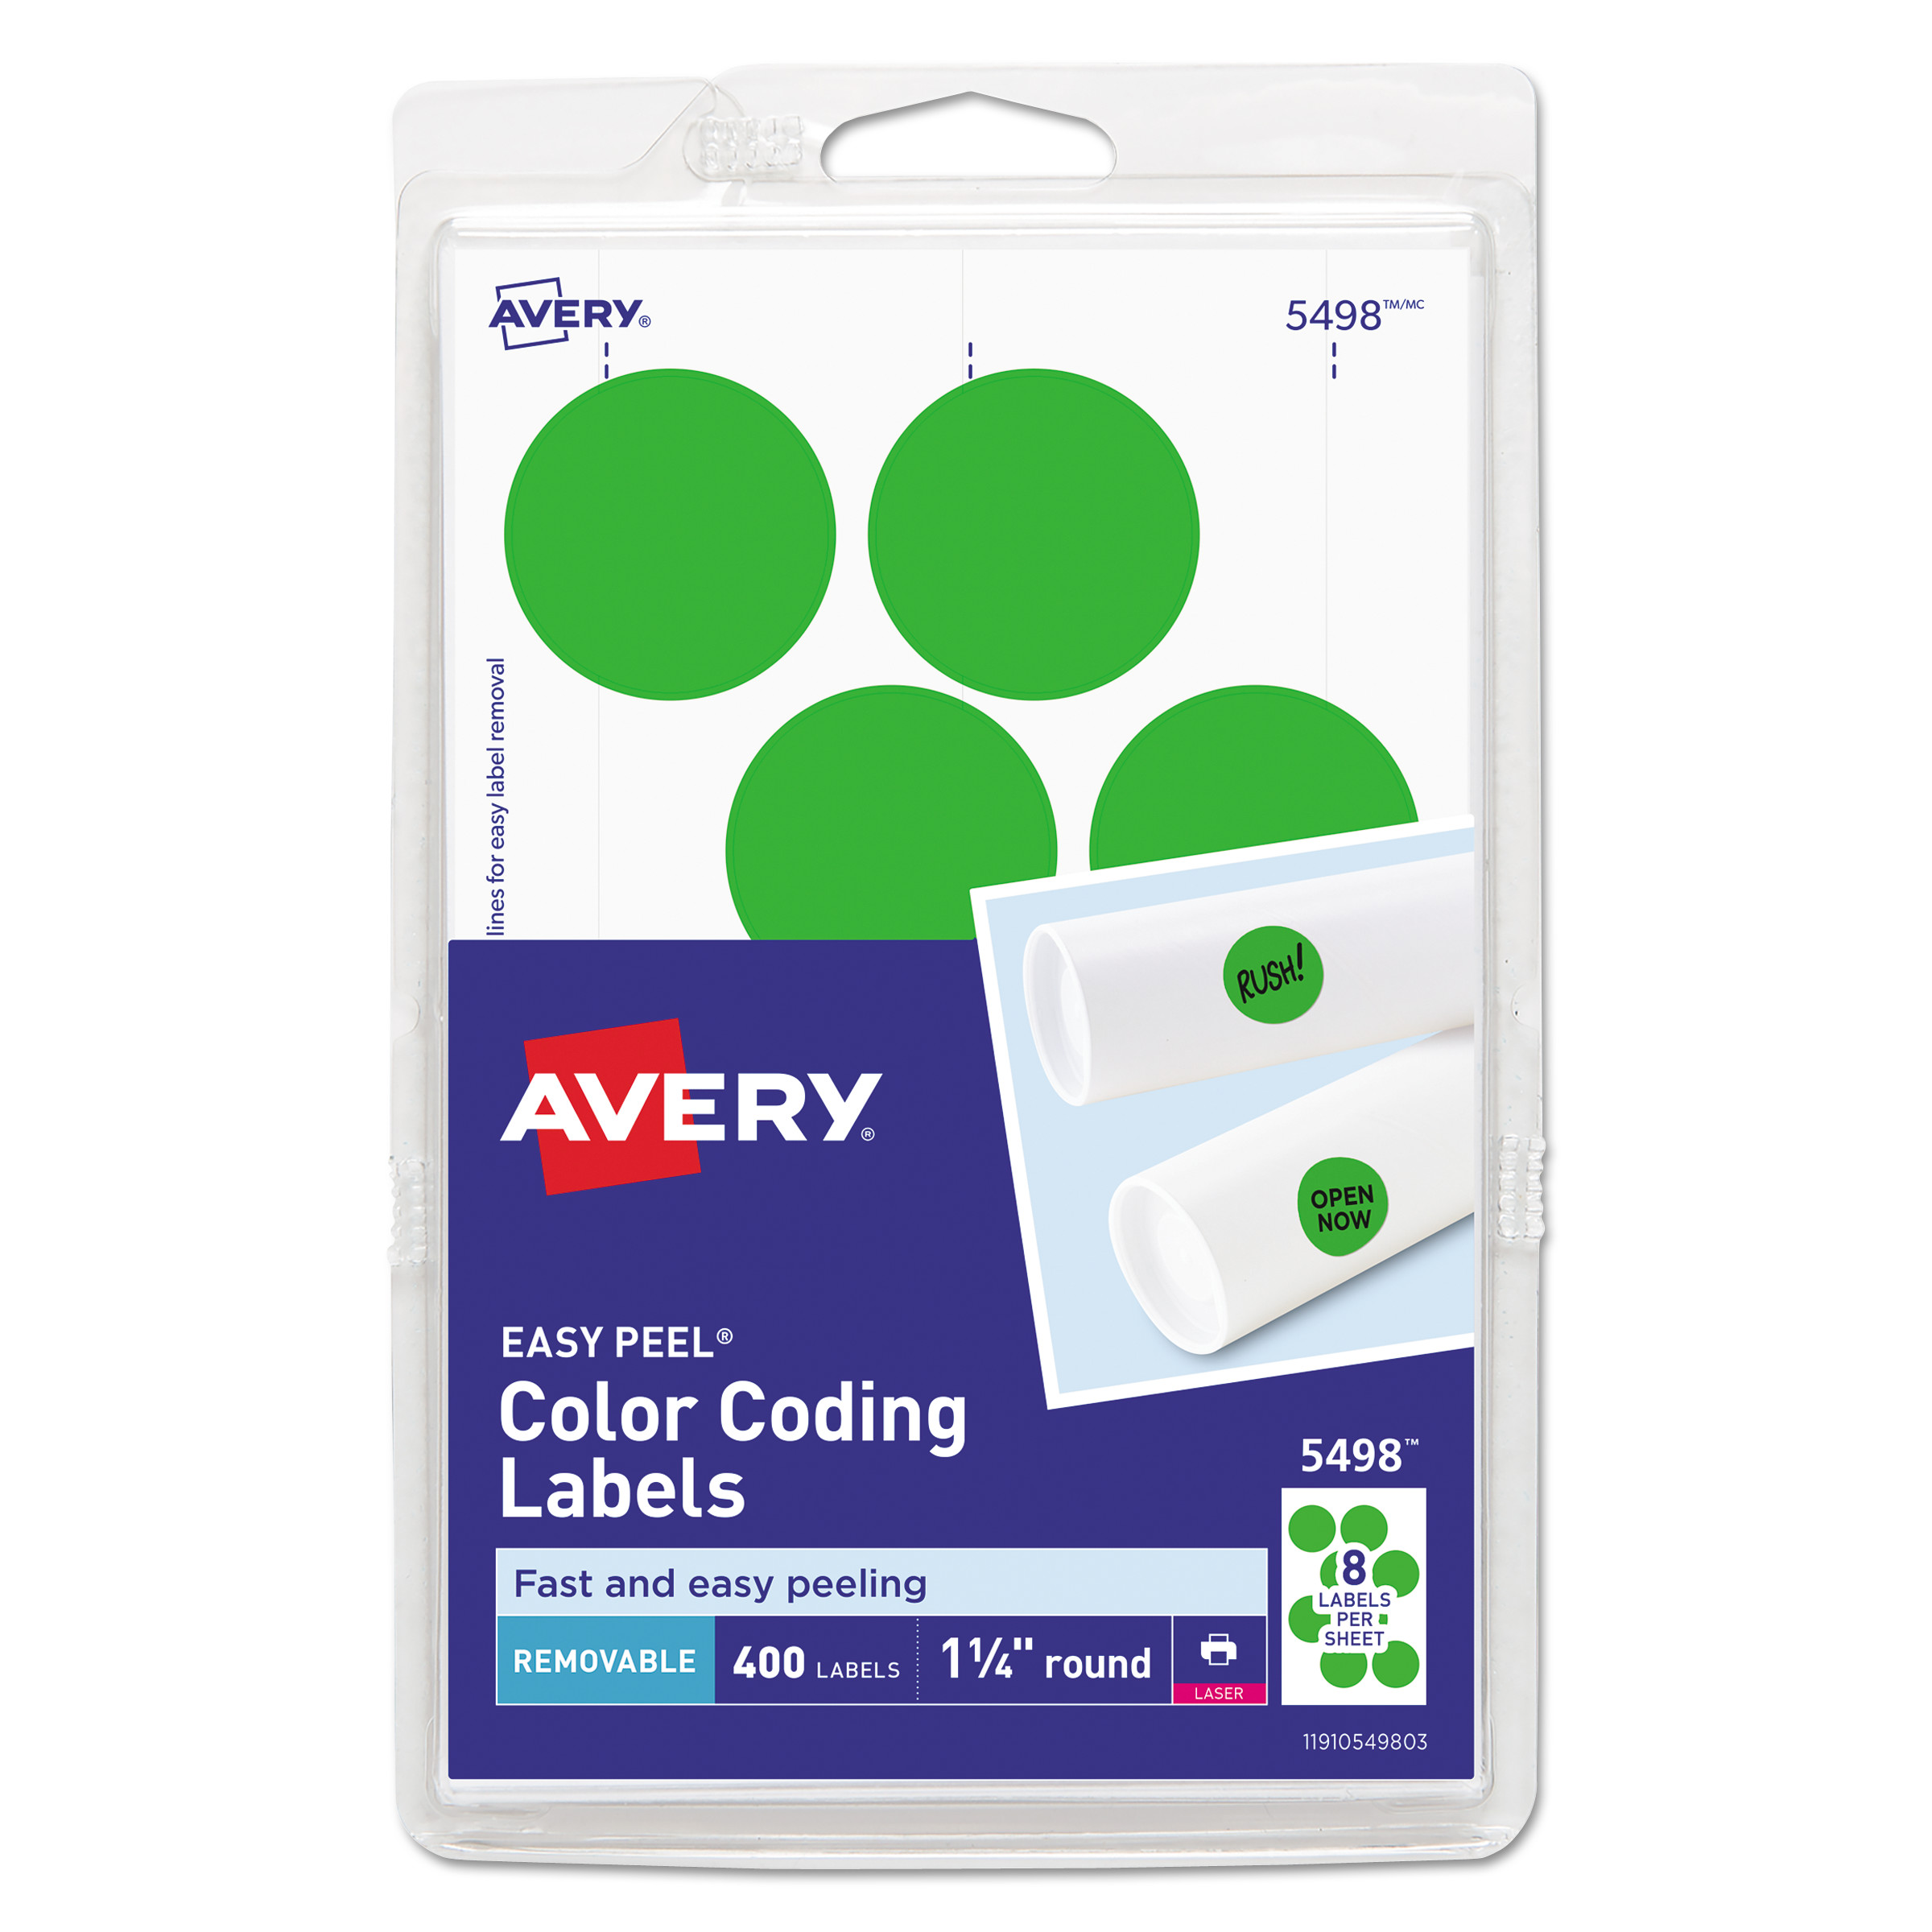  Avery 05498 Printable Self-Adhesive Removable Color-Coding Labels, 1.25 dia., Neon Green, 8/Sheet, 50 Sheets/Pack (AVE05498) 